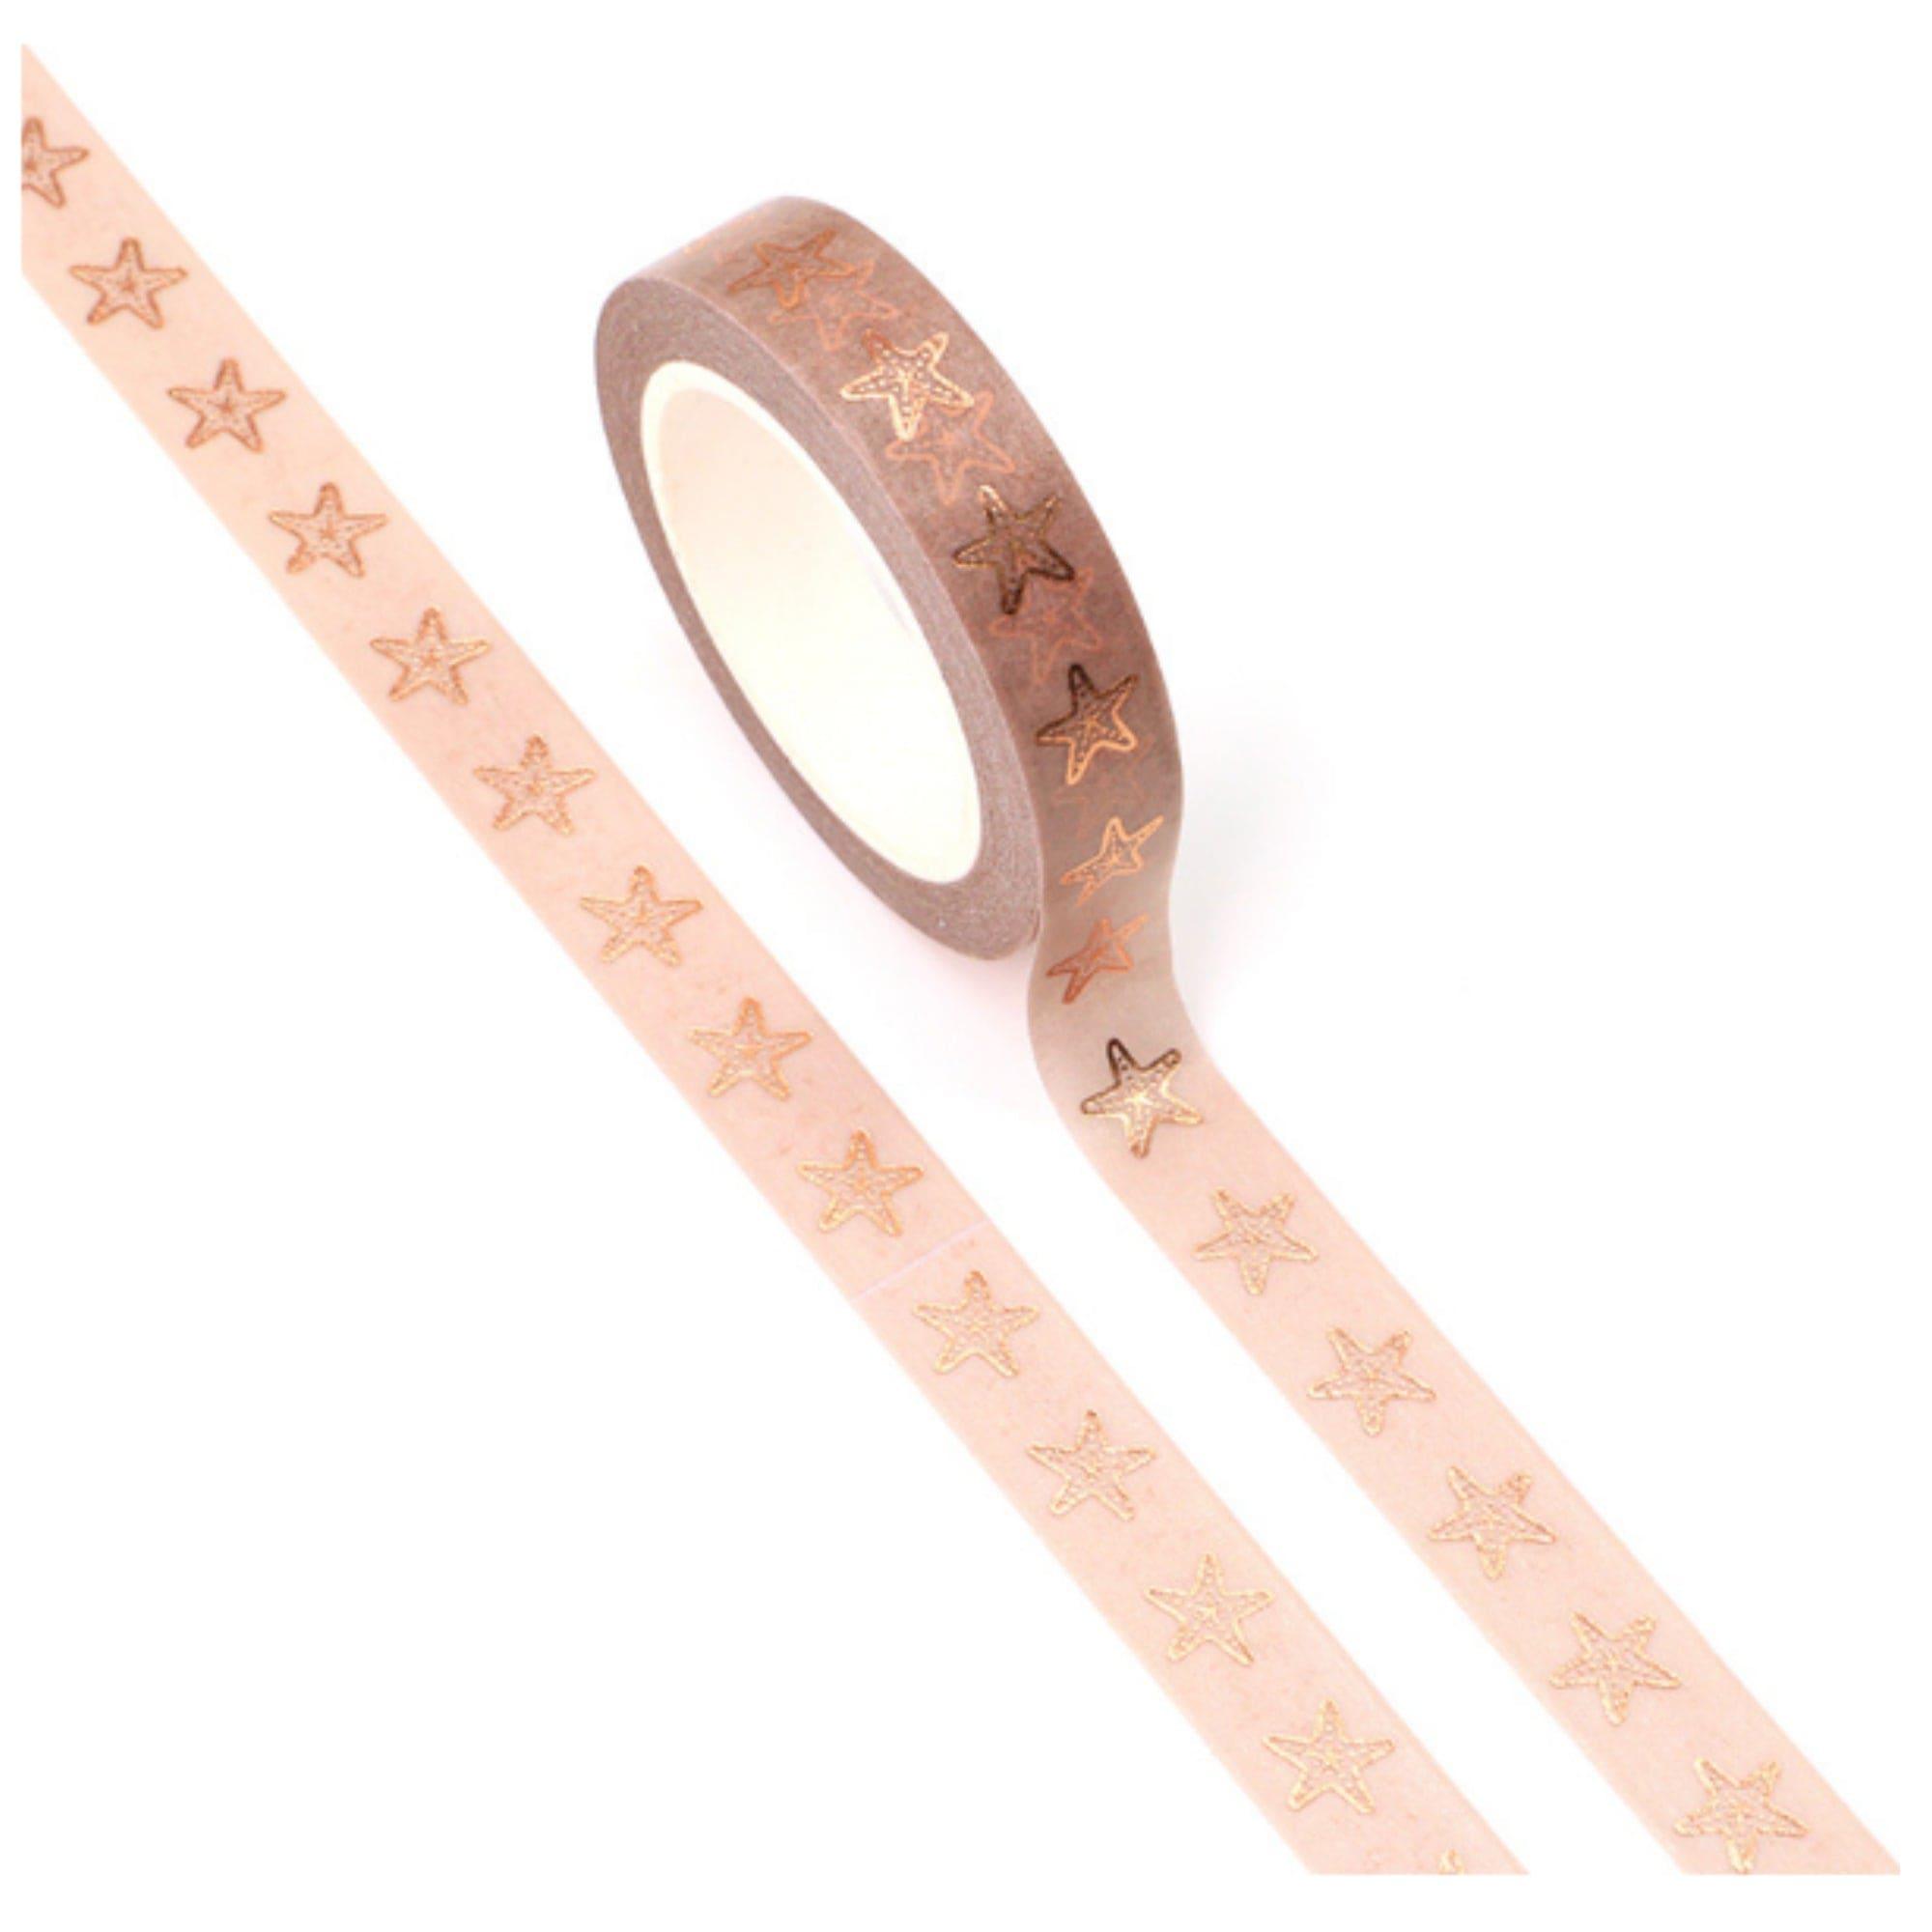 TW Collection Starfish Gold Foiled Washi Tape by SSC Designs - 10mm x 30 Feet